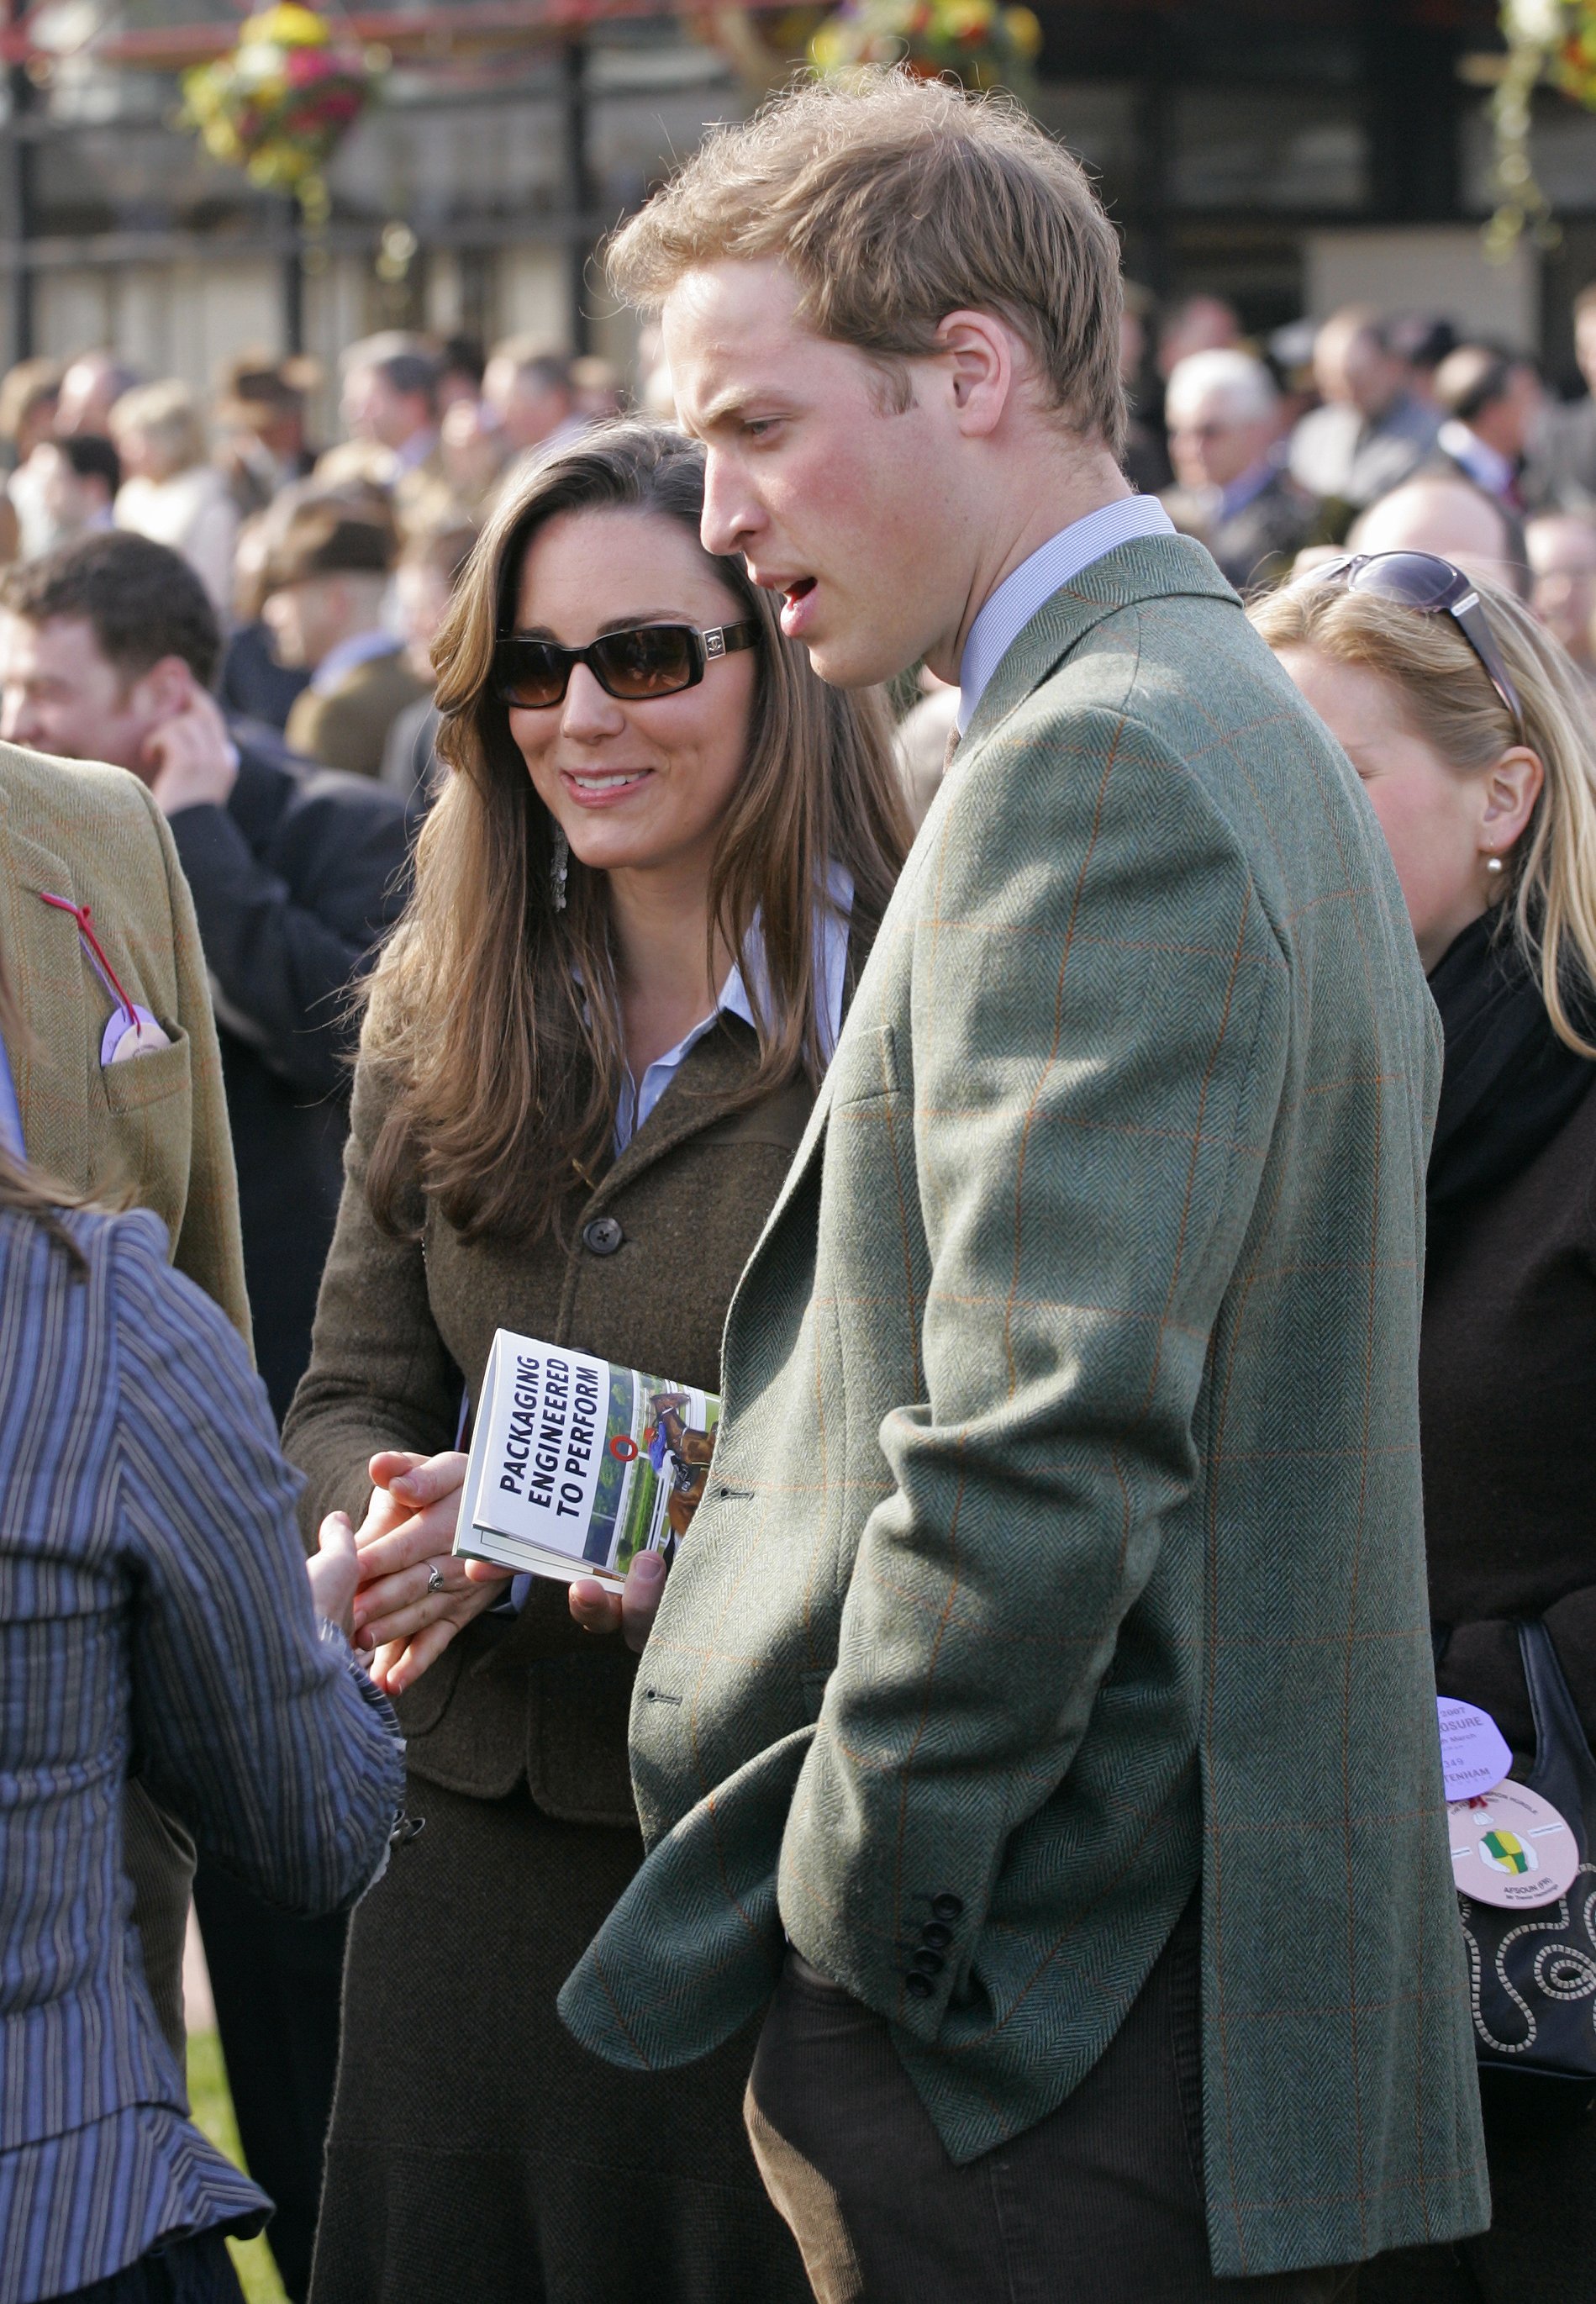 Kate Middleton and Prince William attend day 1 of the Cheltenham Horse Racing Festival on March 13, 2007 in Cheltenham, England | Source: Getty Images